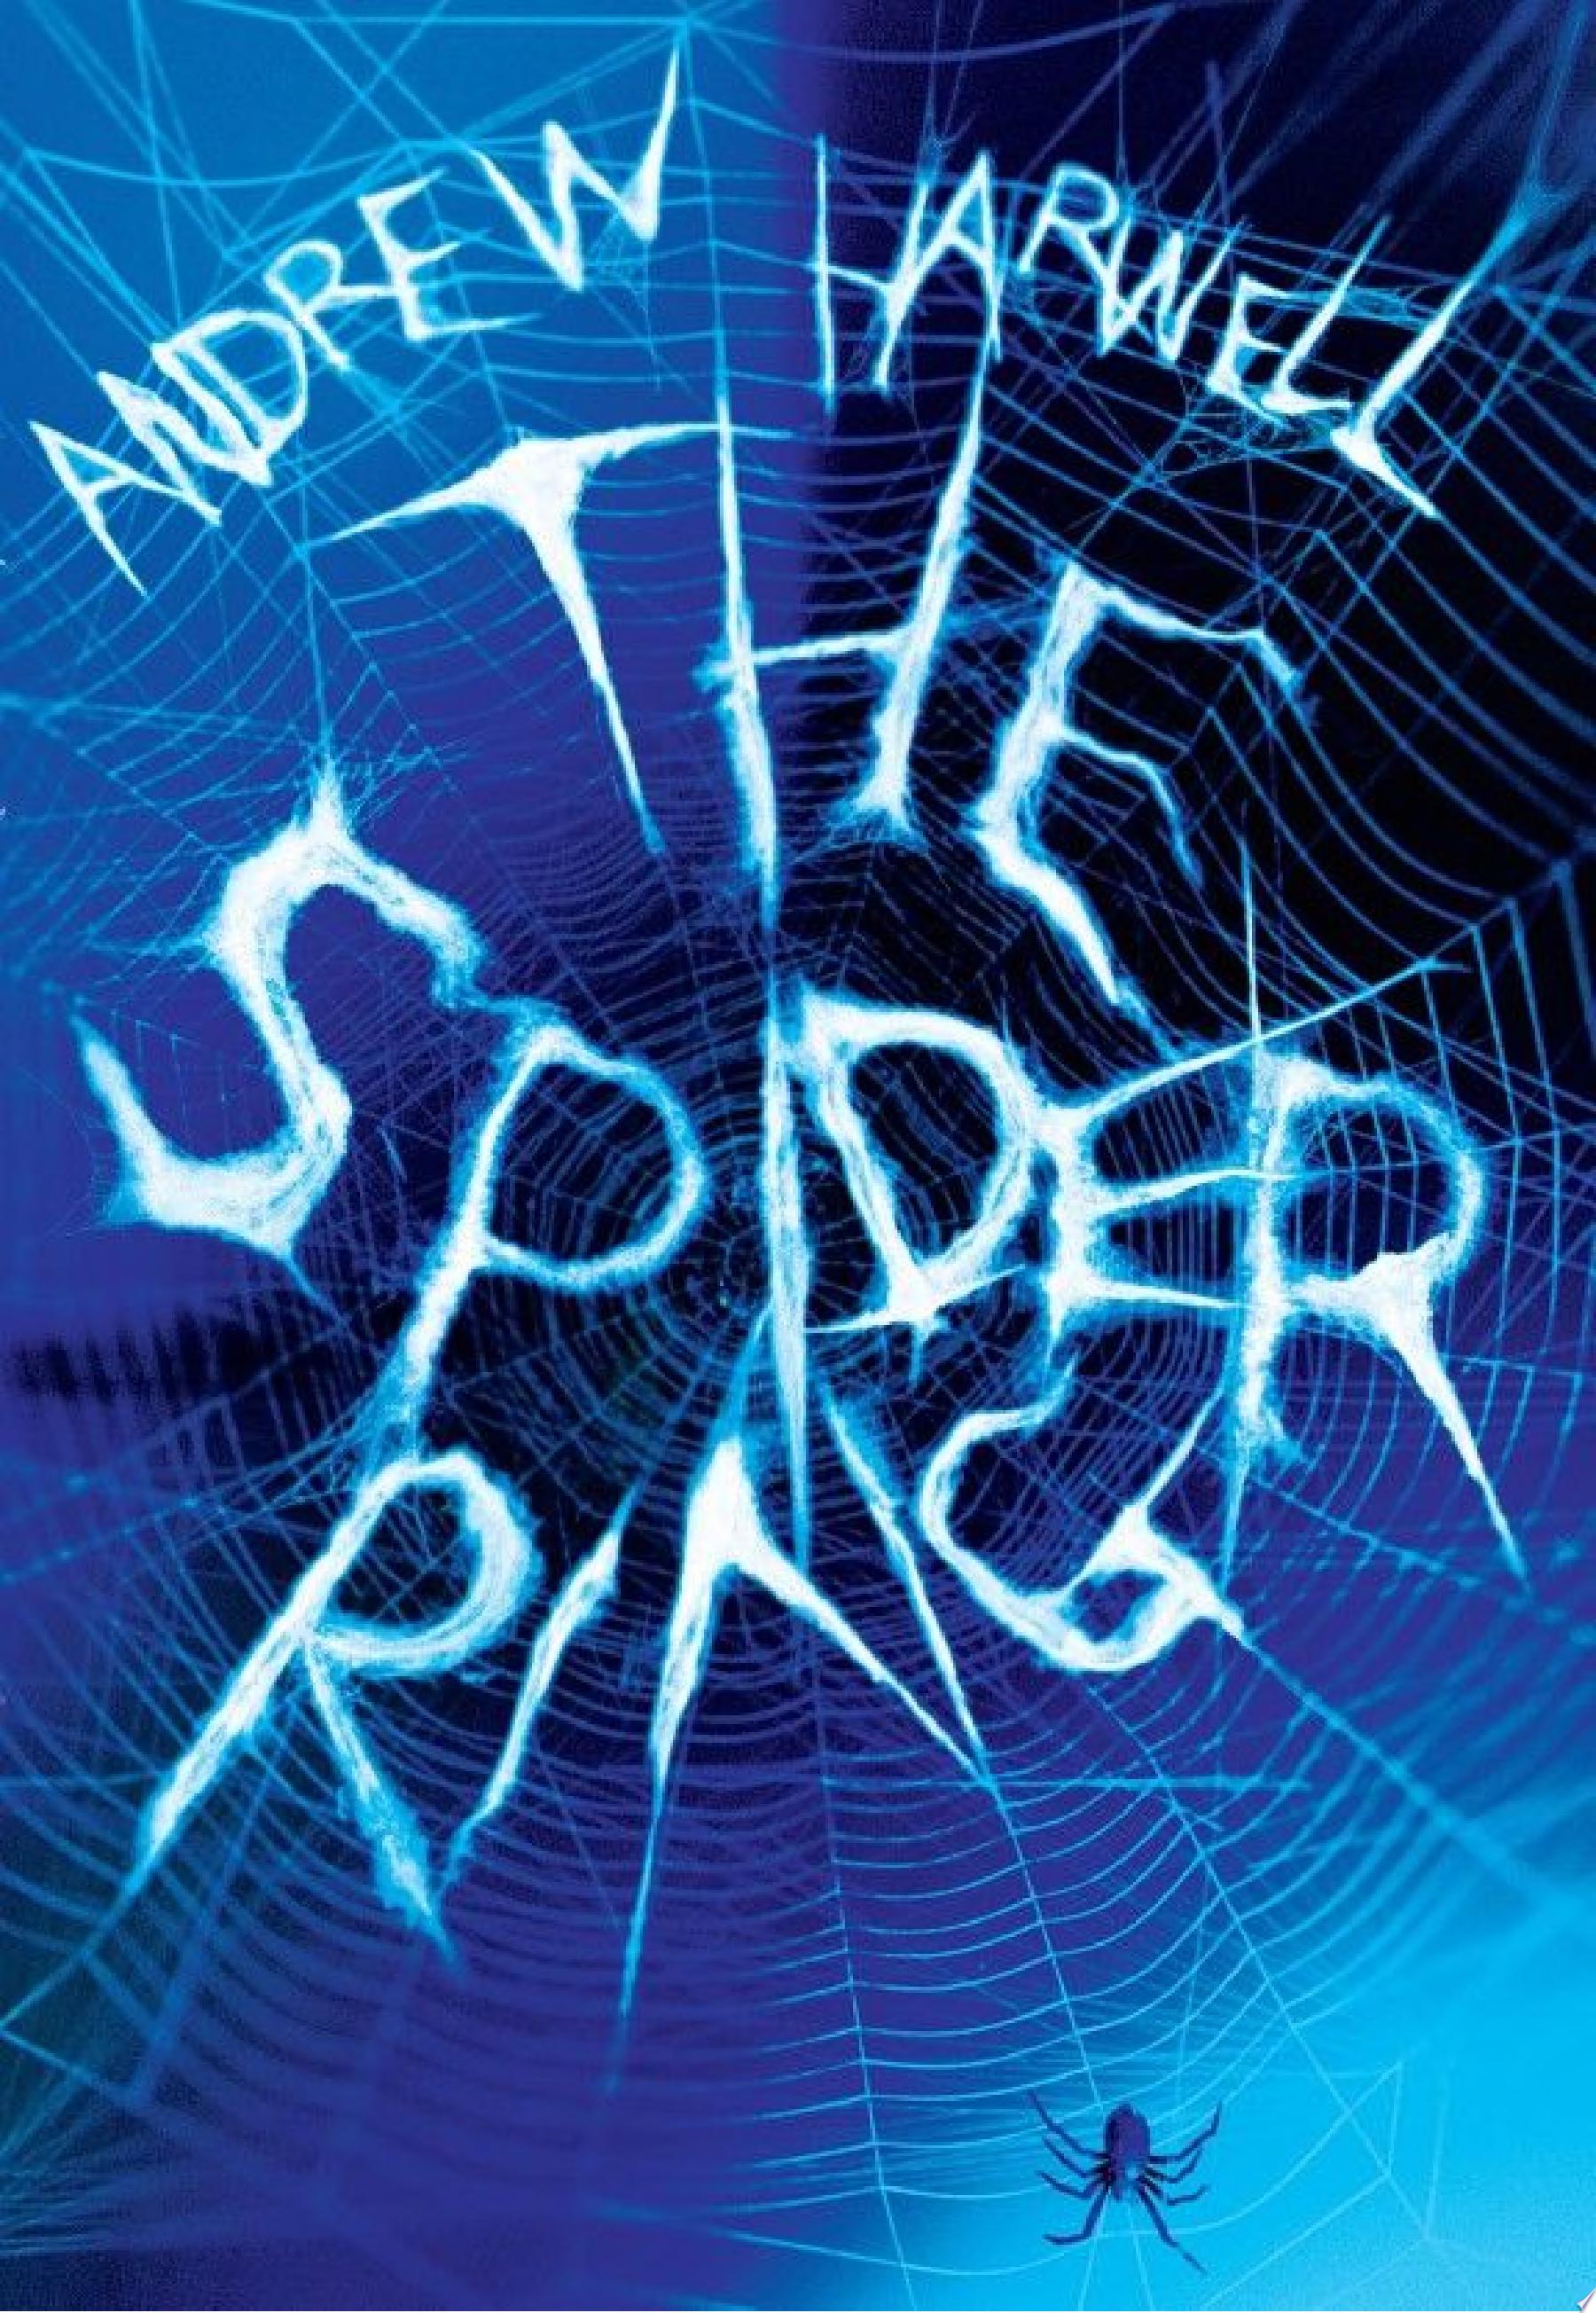 Image for "The Spider Ring"